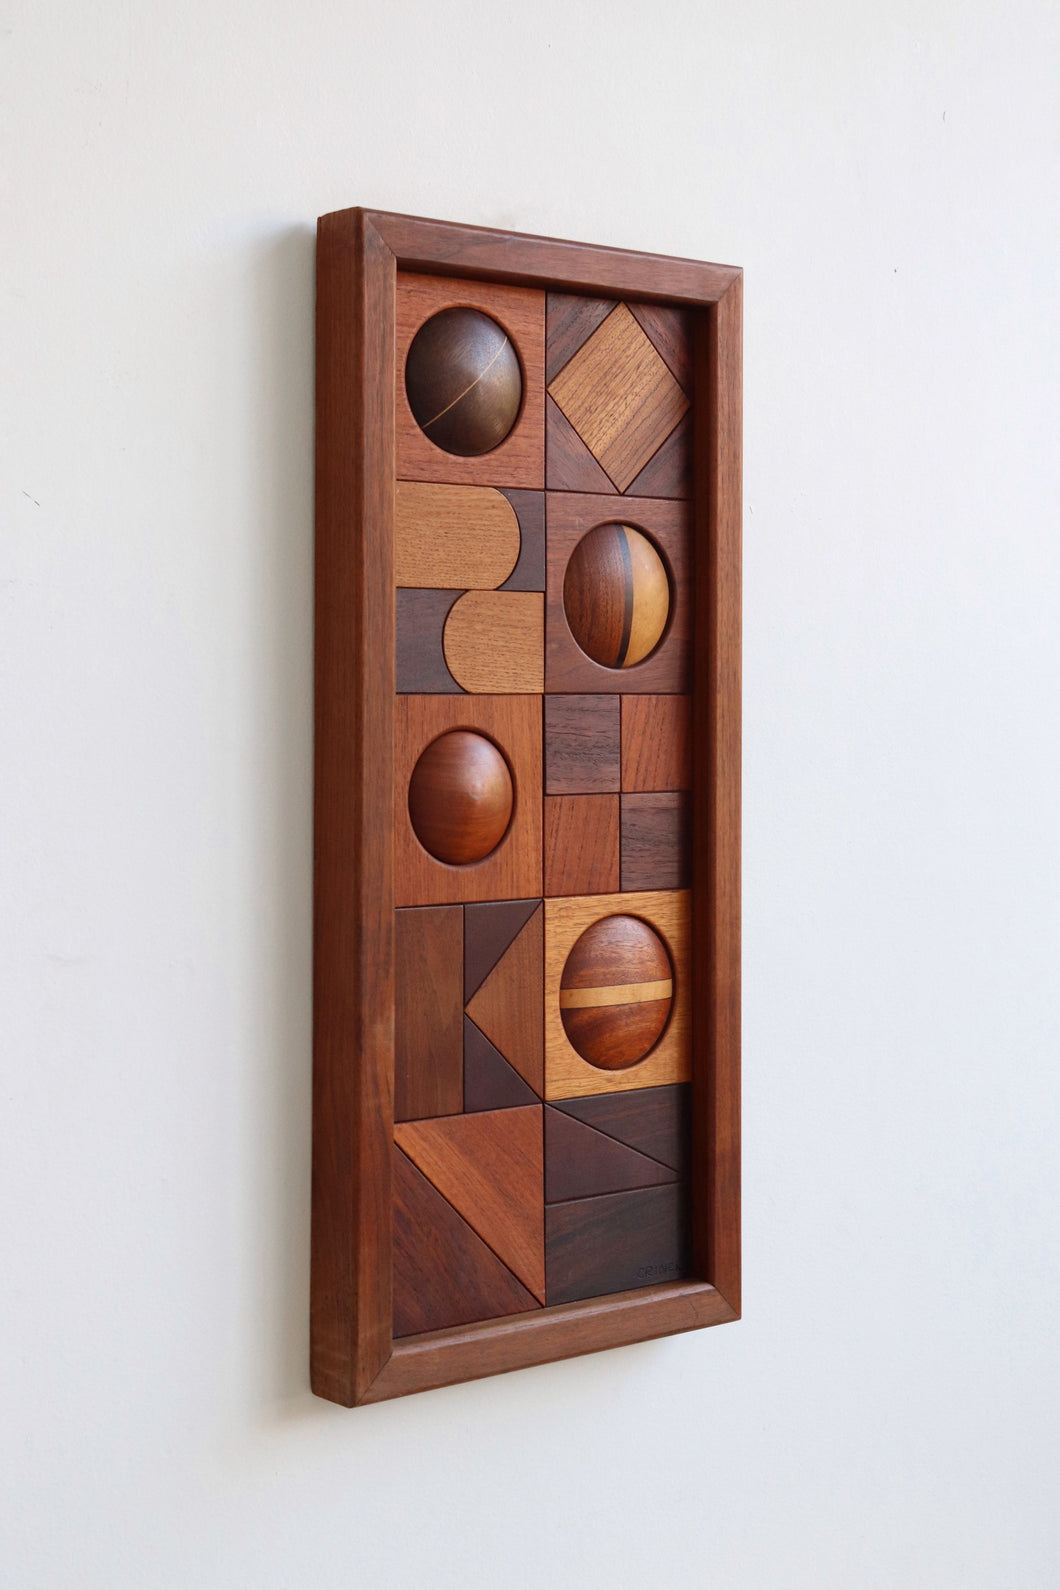 Geometric Wood Assemblage By Dave Criner